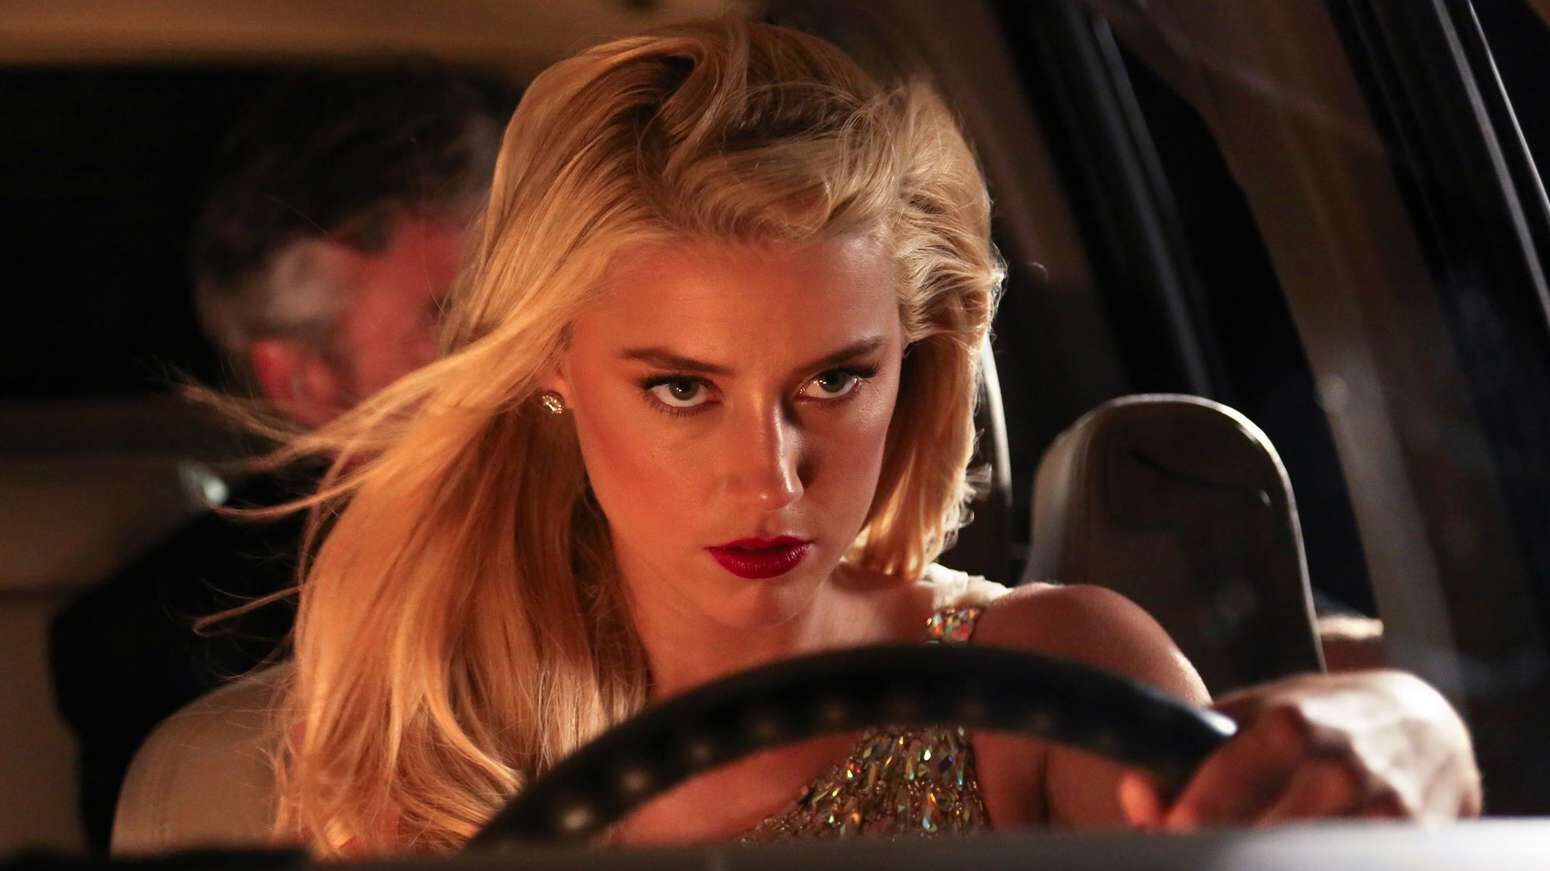 Amber Heard Sexy - Amber Heard Took To Instagram To Attack Johnny Depp Again